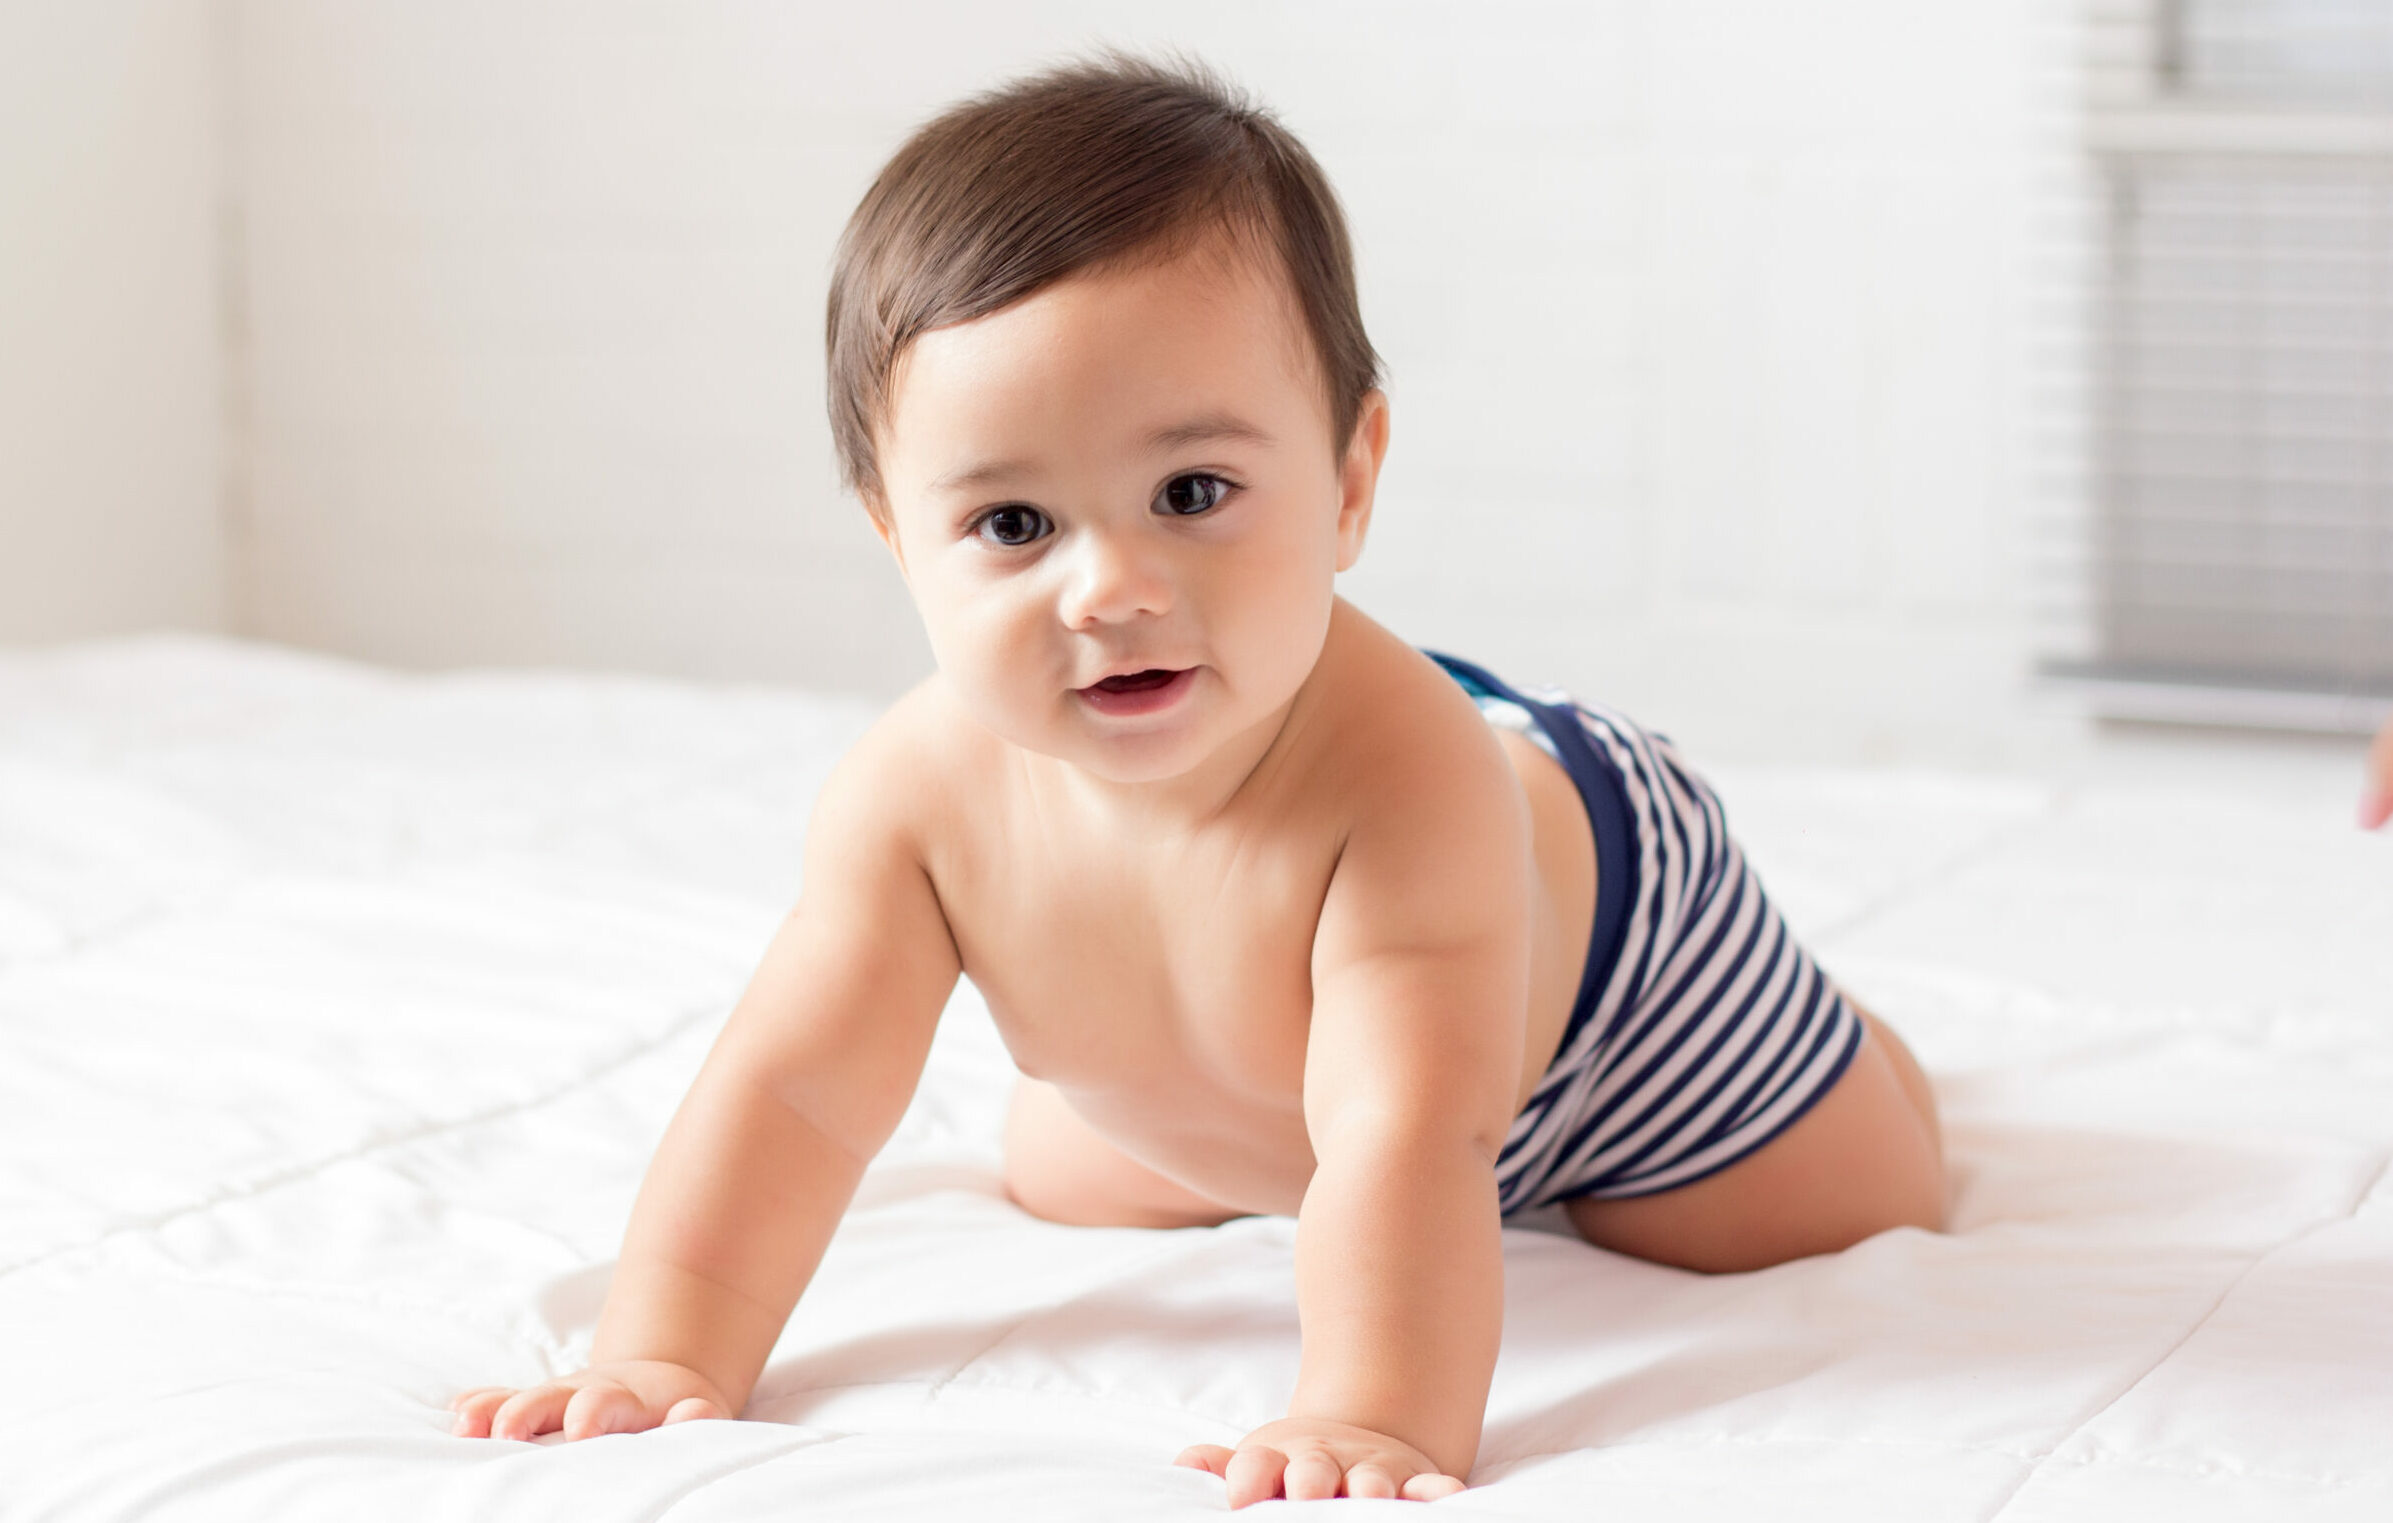 The stages of tummy time for babies